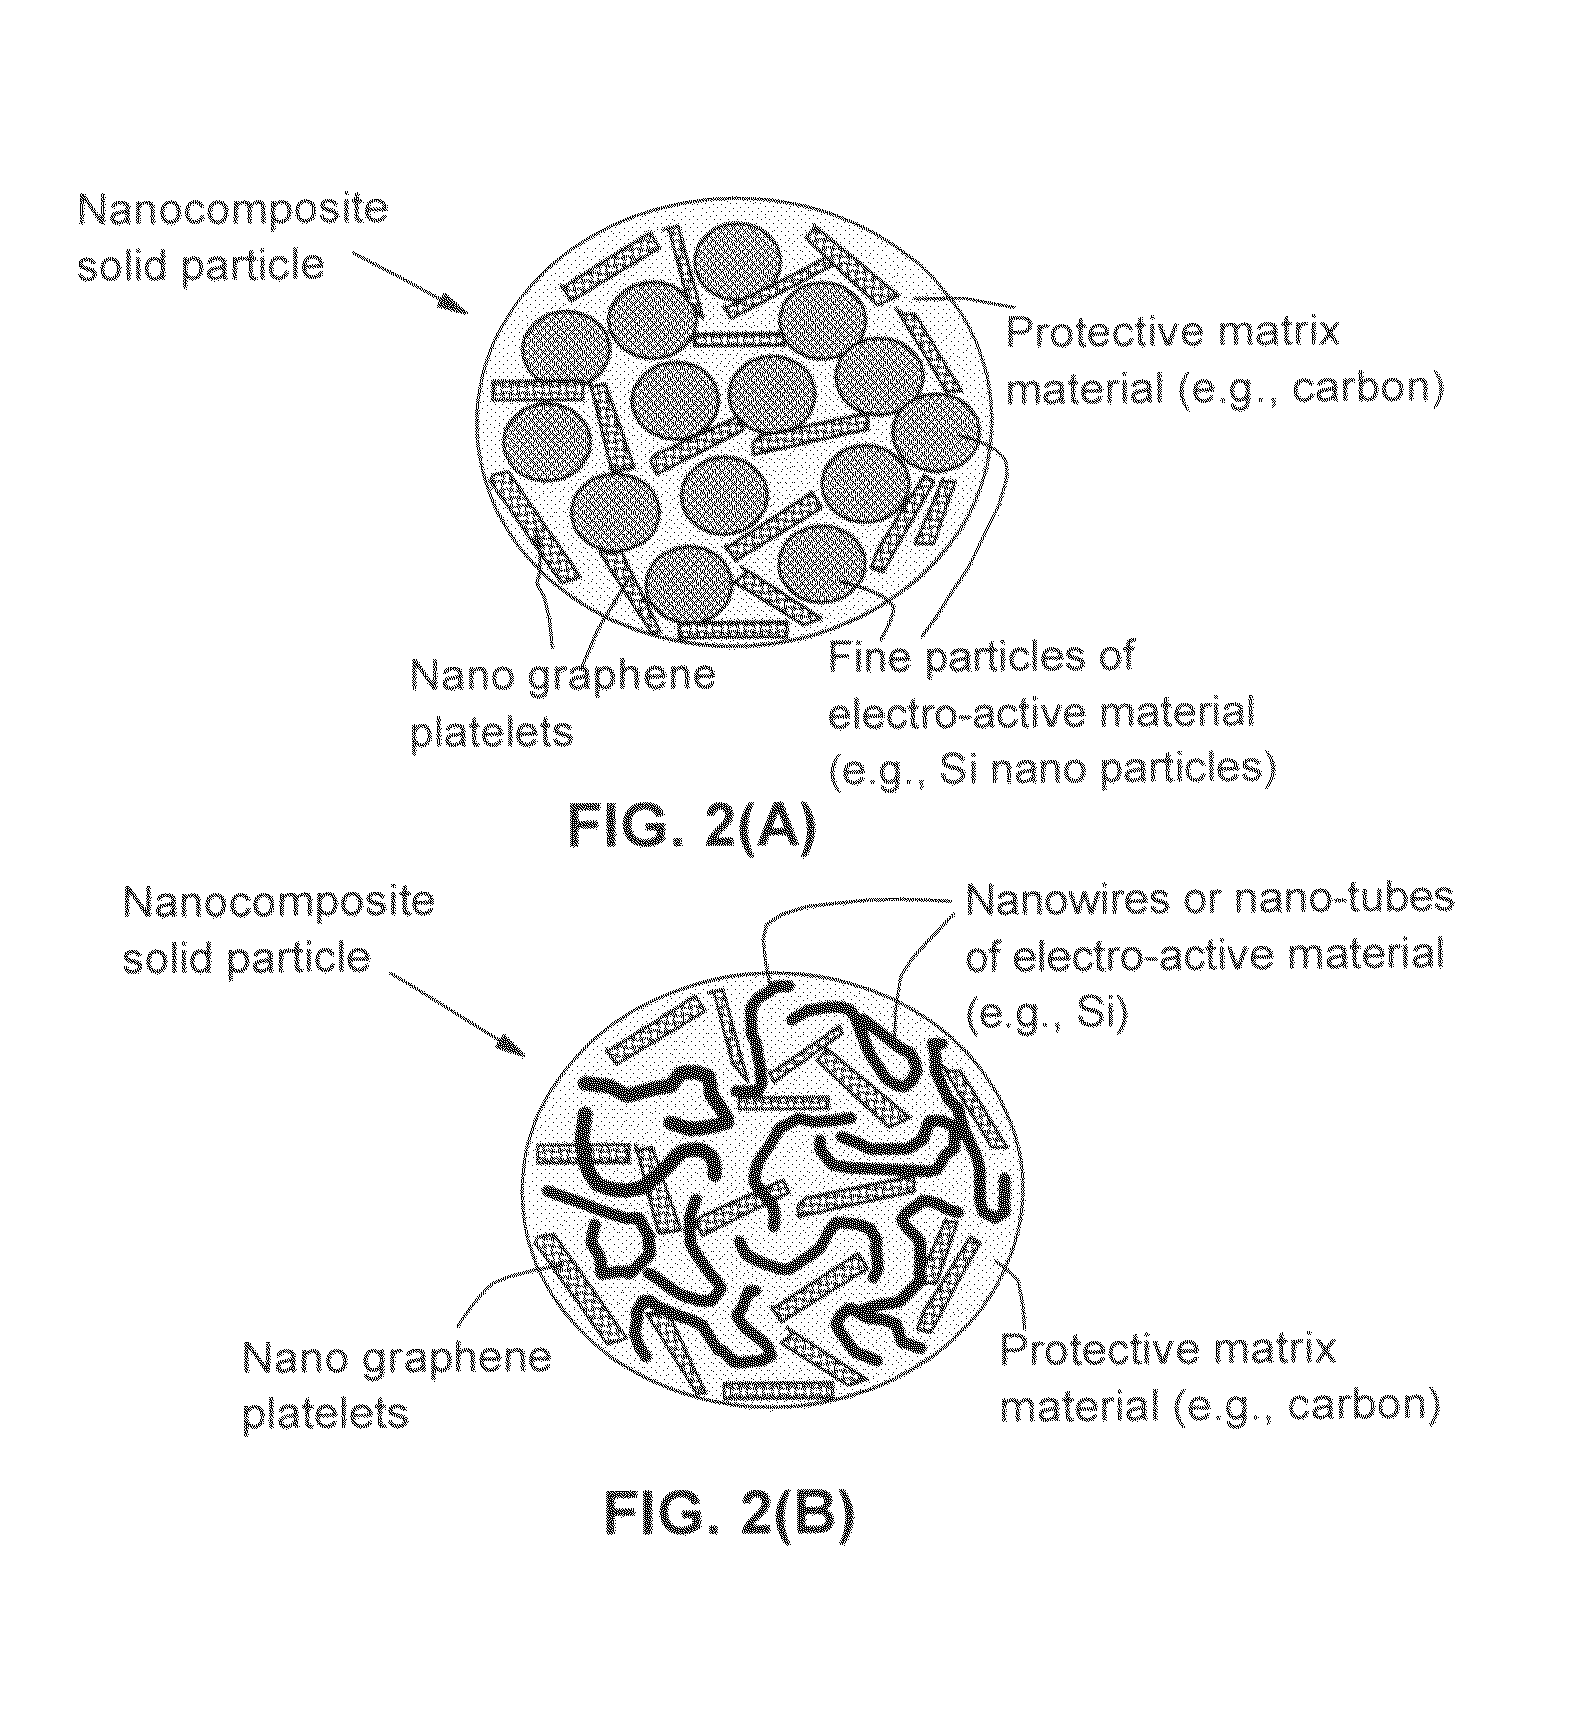 Process for producing nano graphene reinforced composite particles for lithium battery electrodes